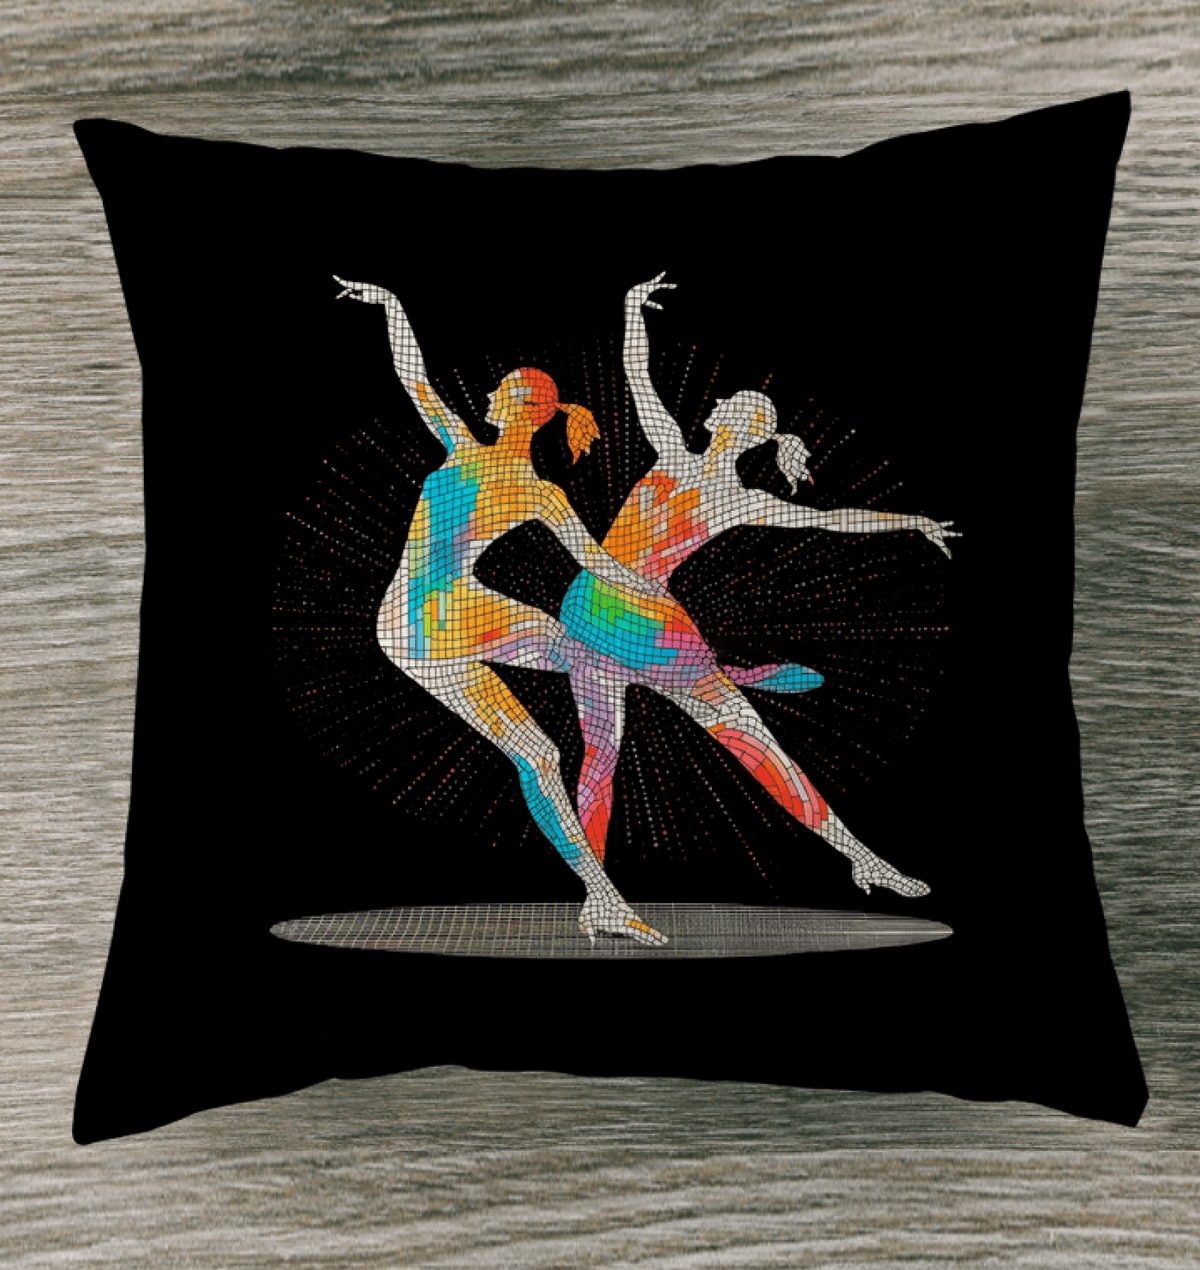 Powerful Feminine Movement Style Outdoor Pillow - Beyond T-shirts